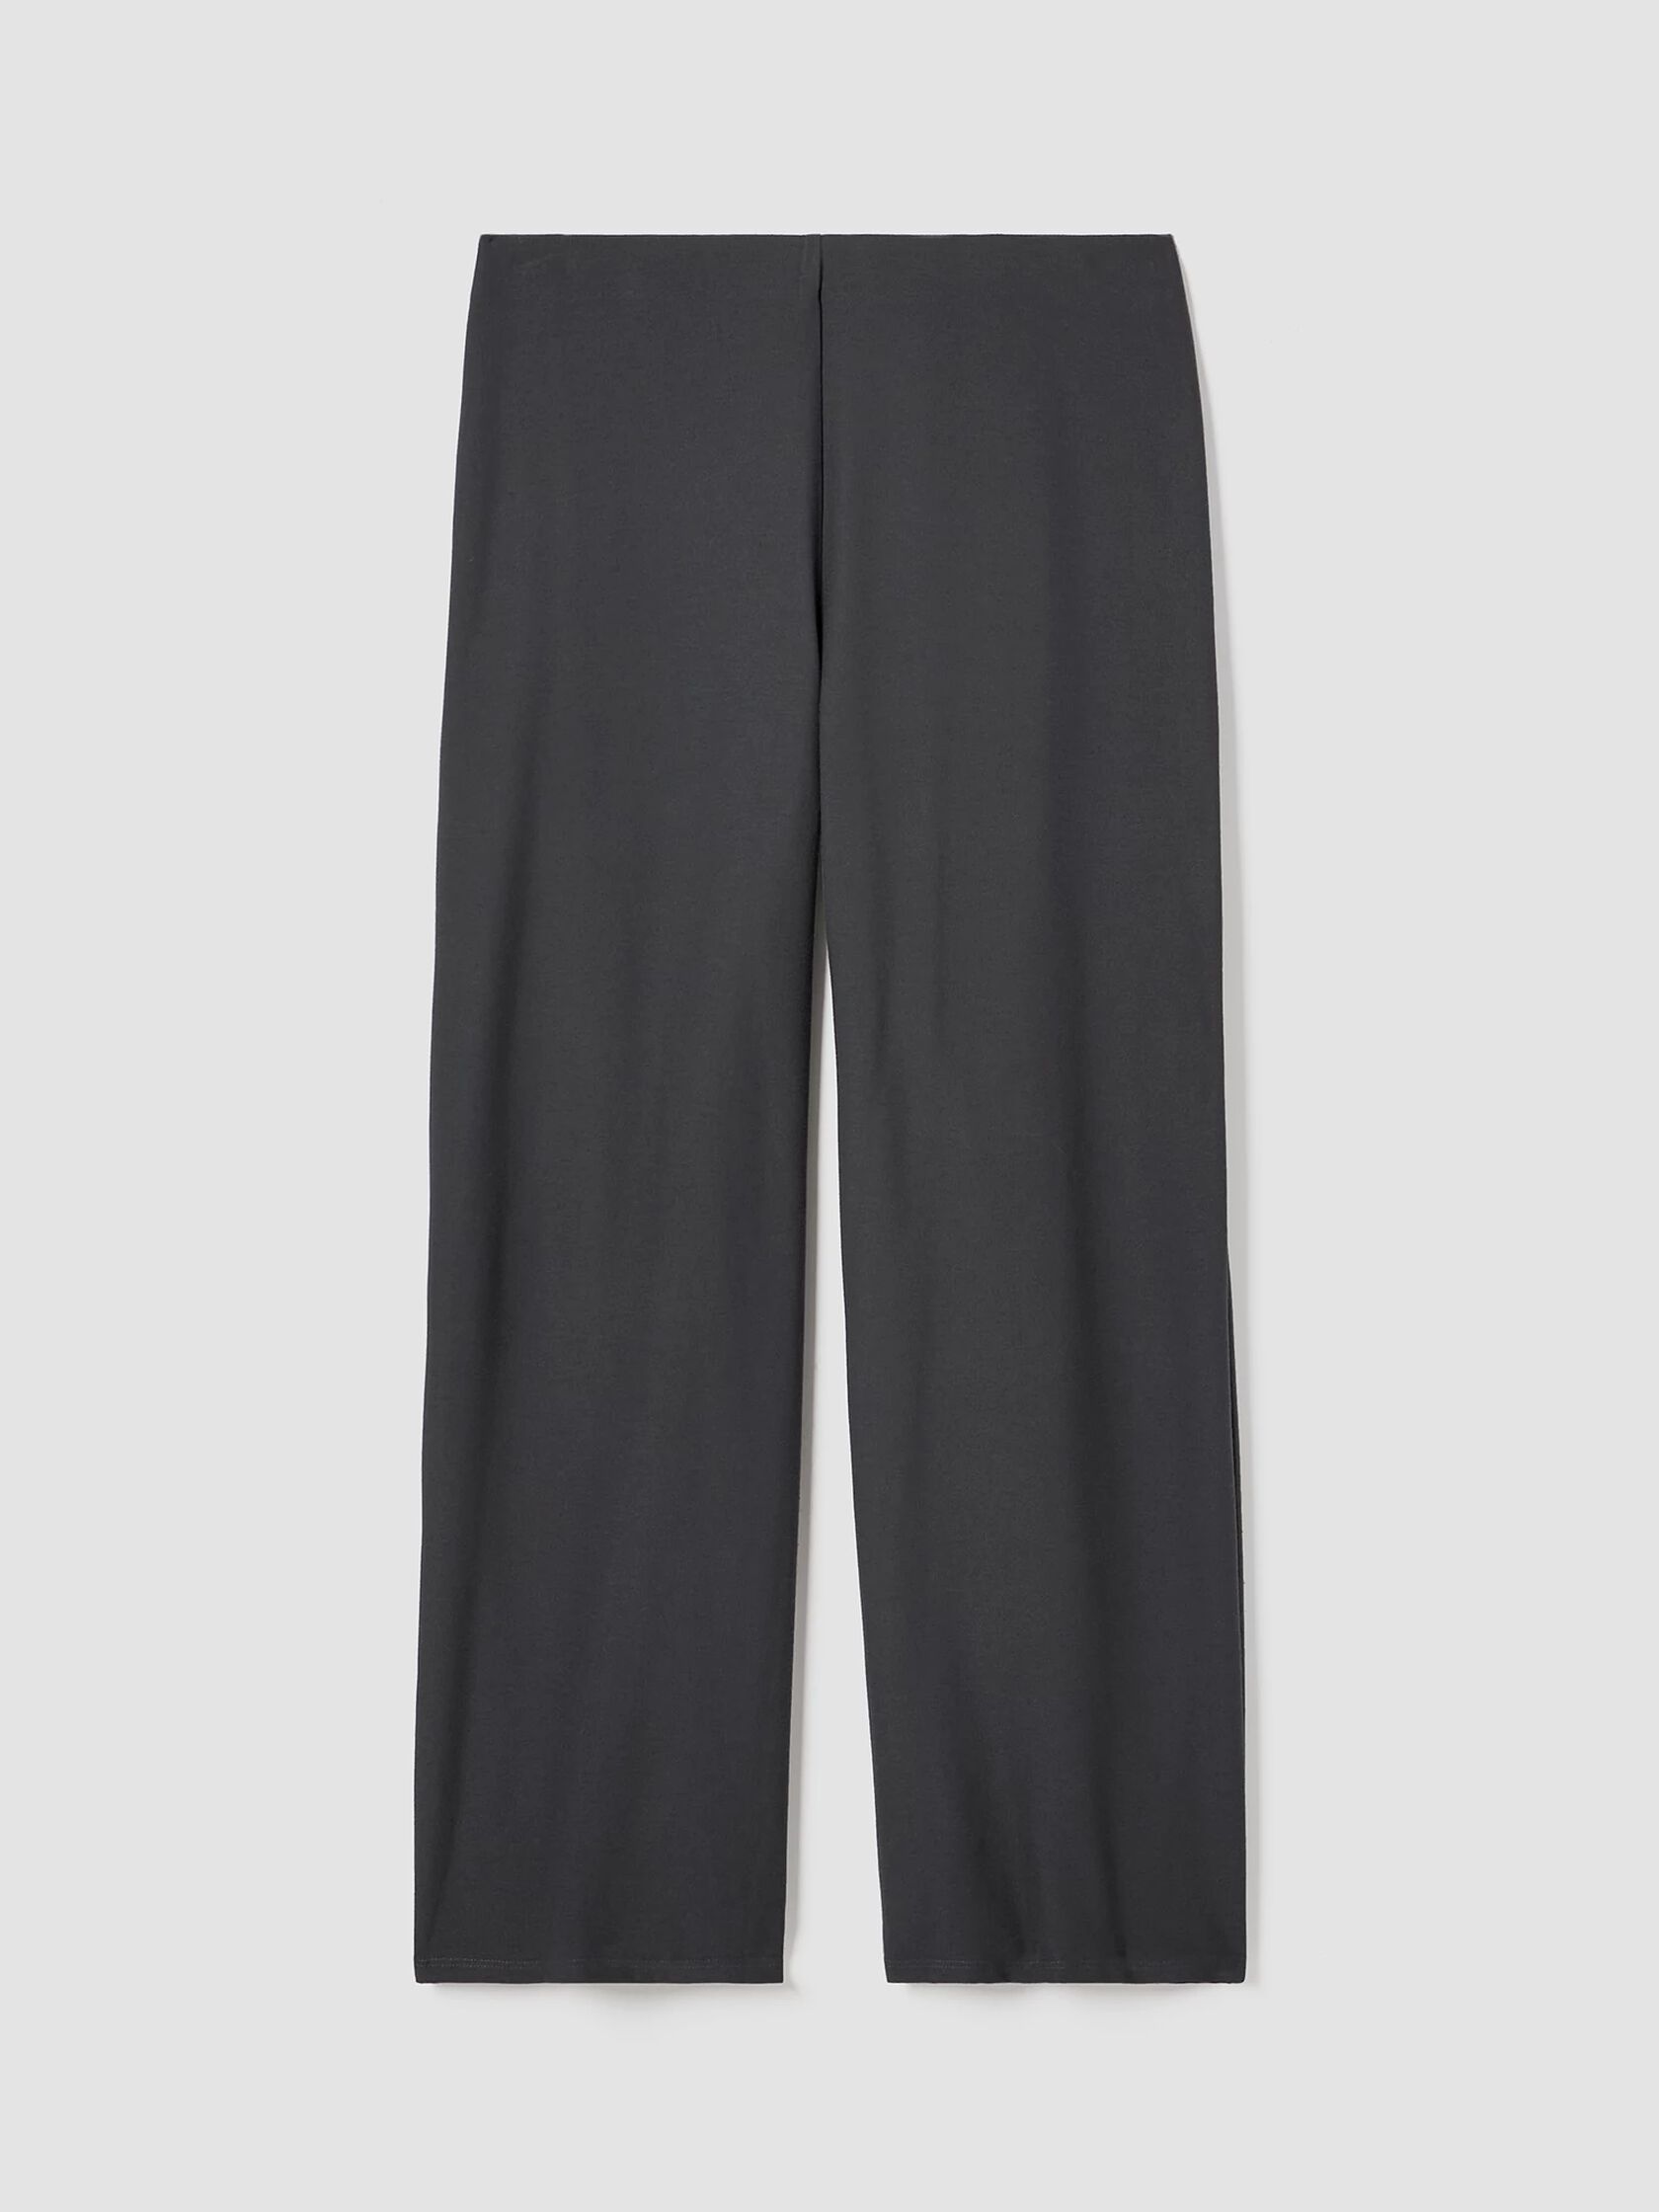 Washable Stretch Crepe Wide-Leg Pant | EILEEN FISHER